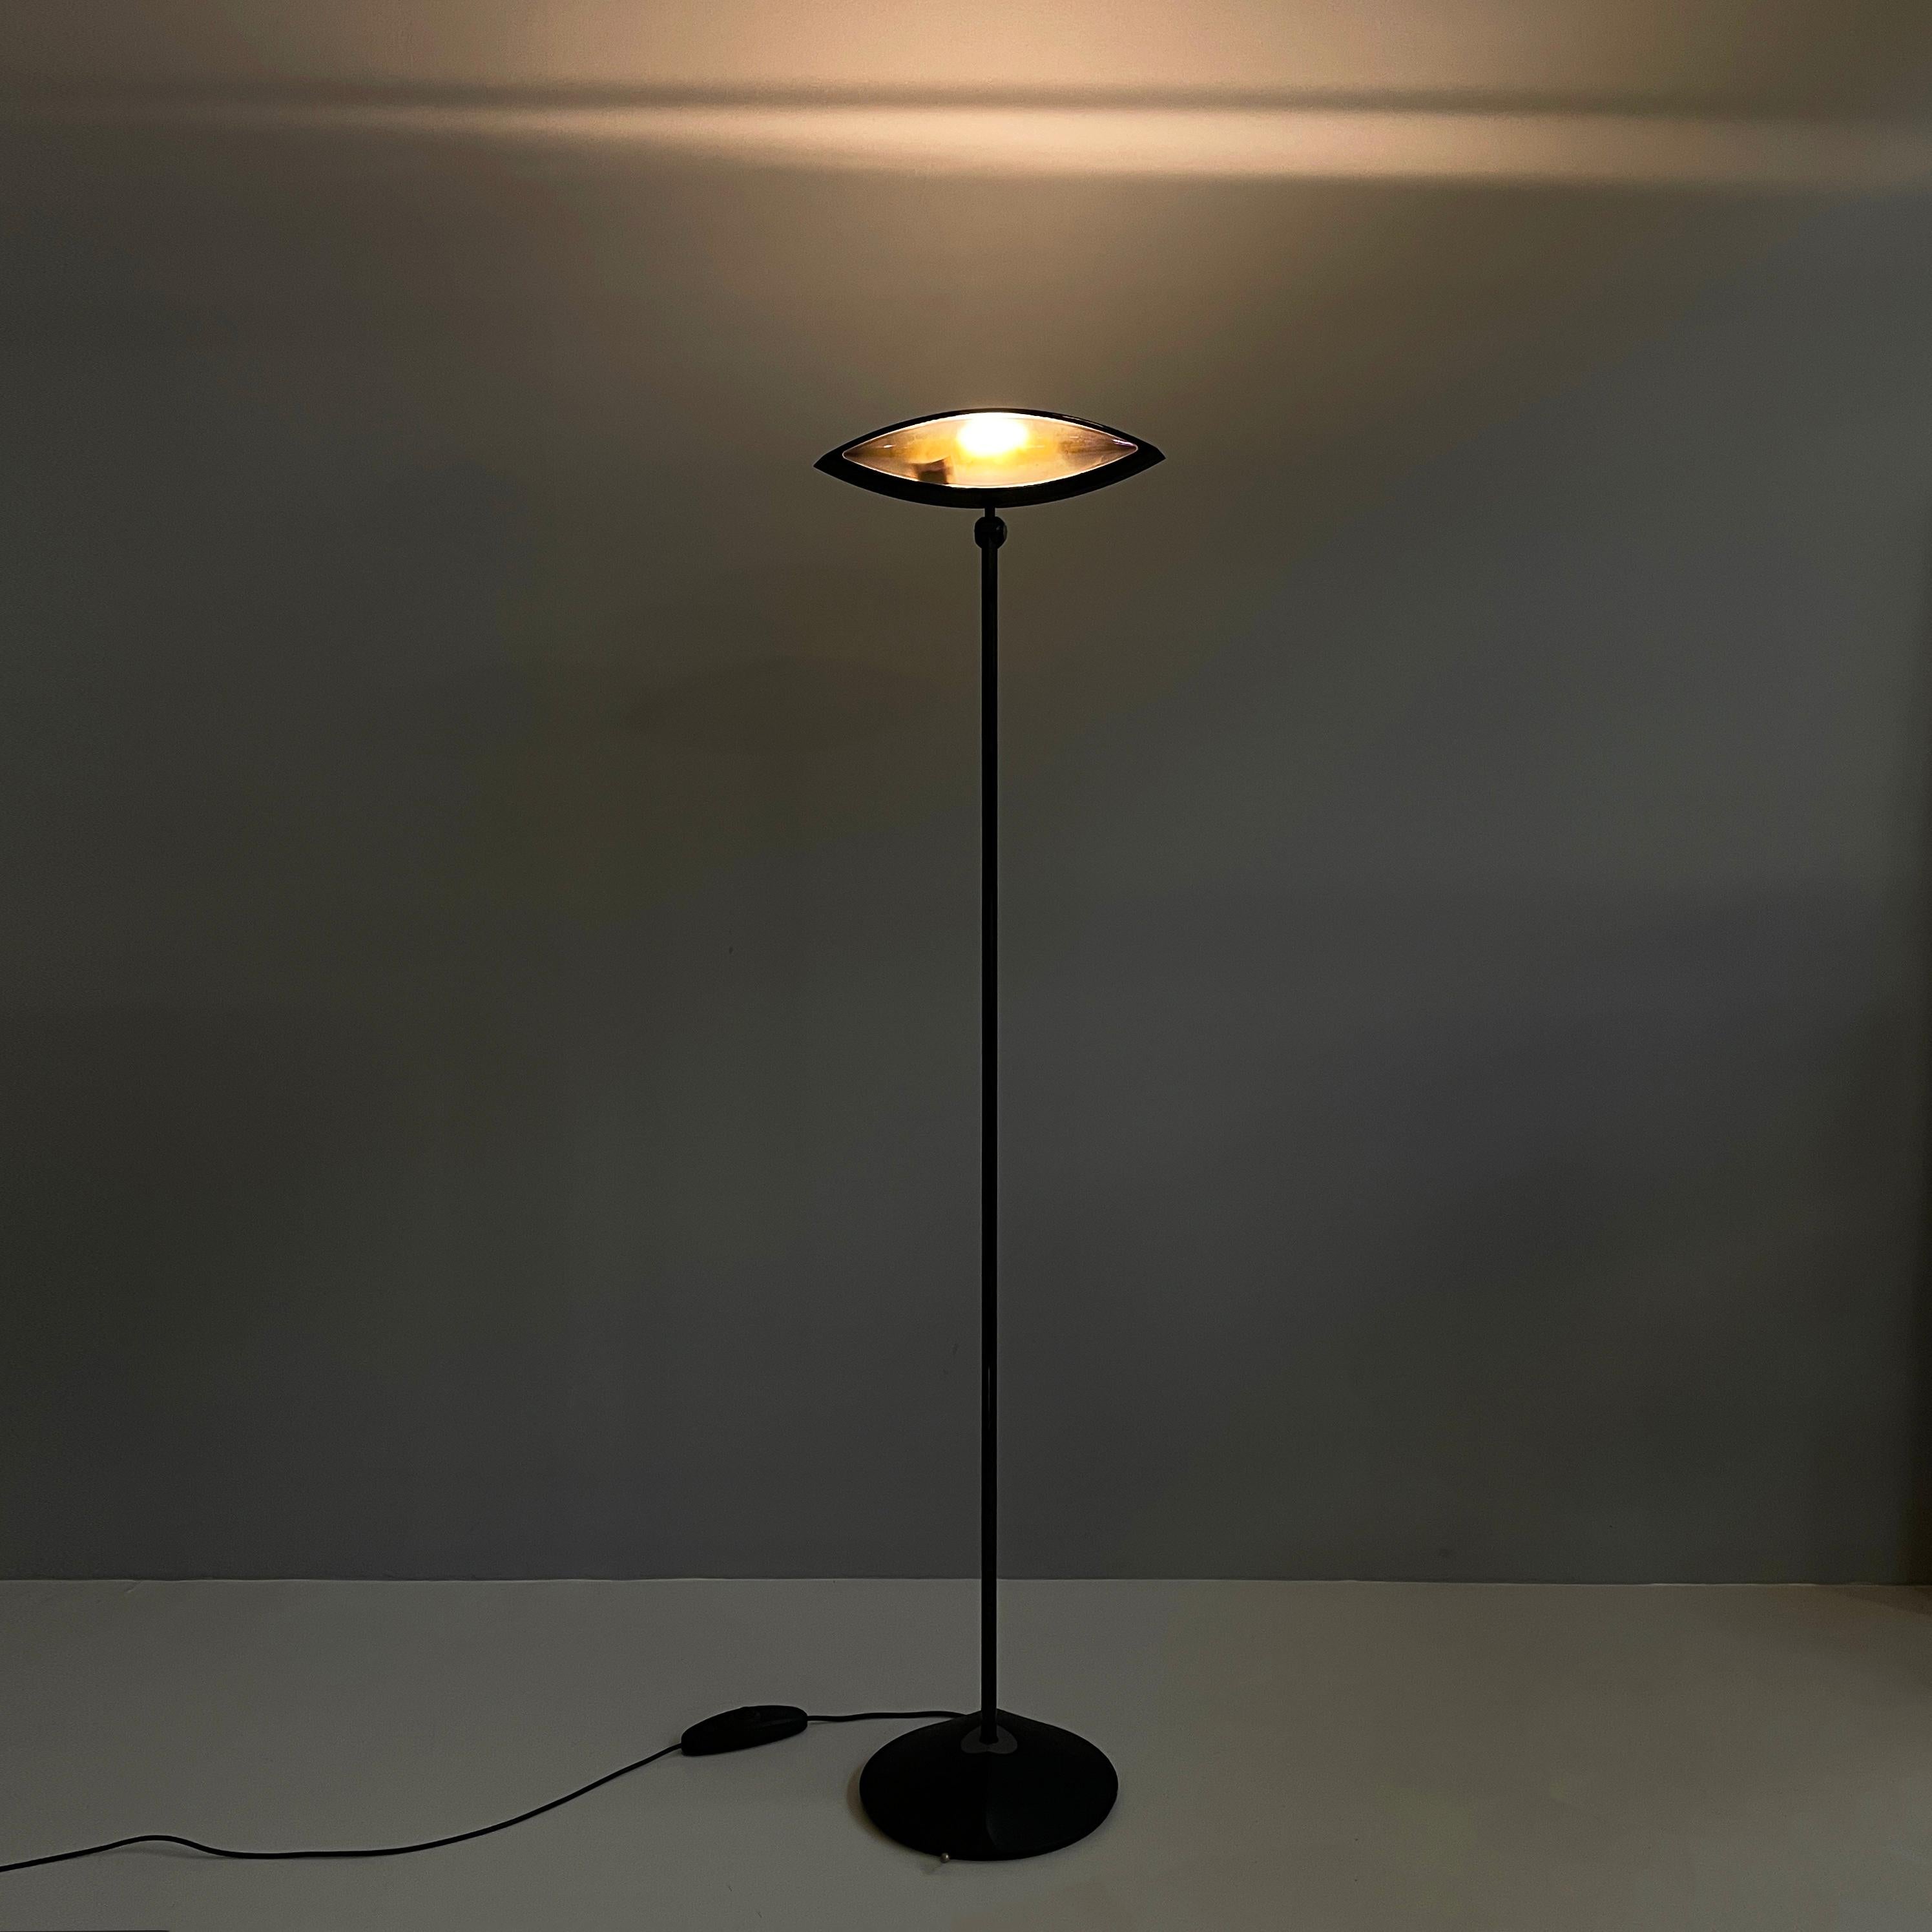 Italian modern color glass and metal Floor lamp Aeto by Fabio Lombardo for Flos, 1980s
Iconic and fantastic floor lamp mod. Aeto with eye-shaped diffuser. This is made of black painted metal with a double colored glass on the sides and a transparent